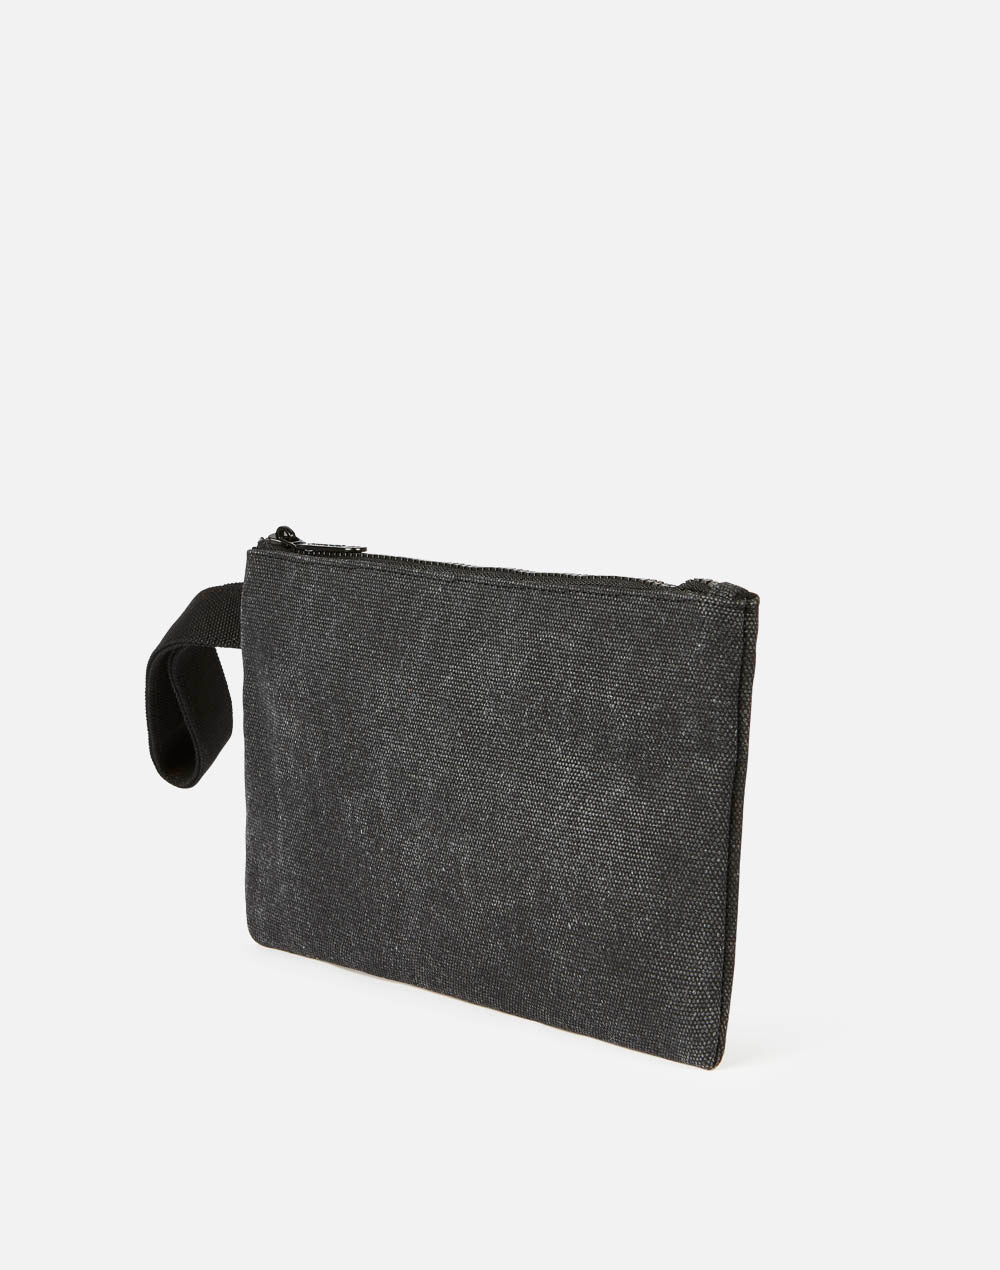 CLUTCH IN STONE WASHED CANVAS COTTON